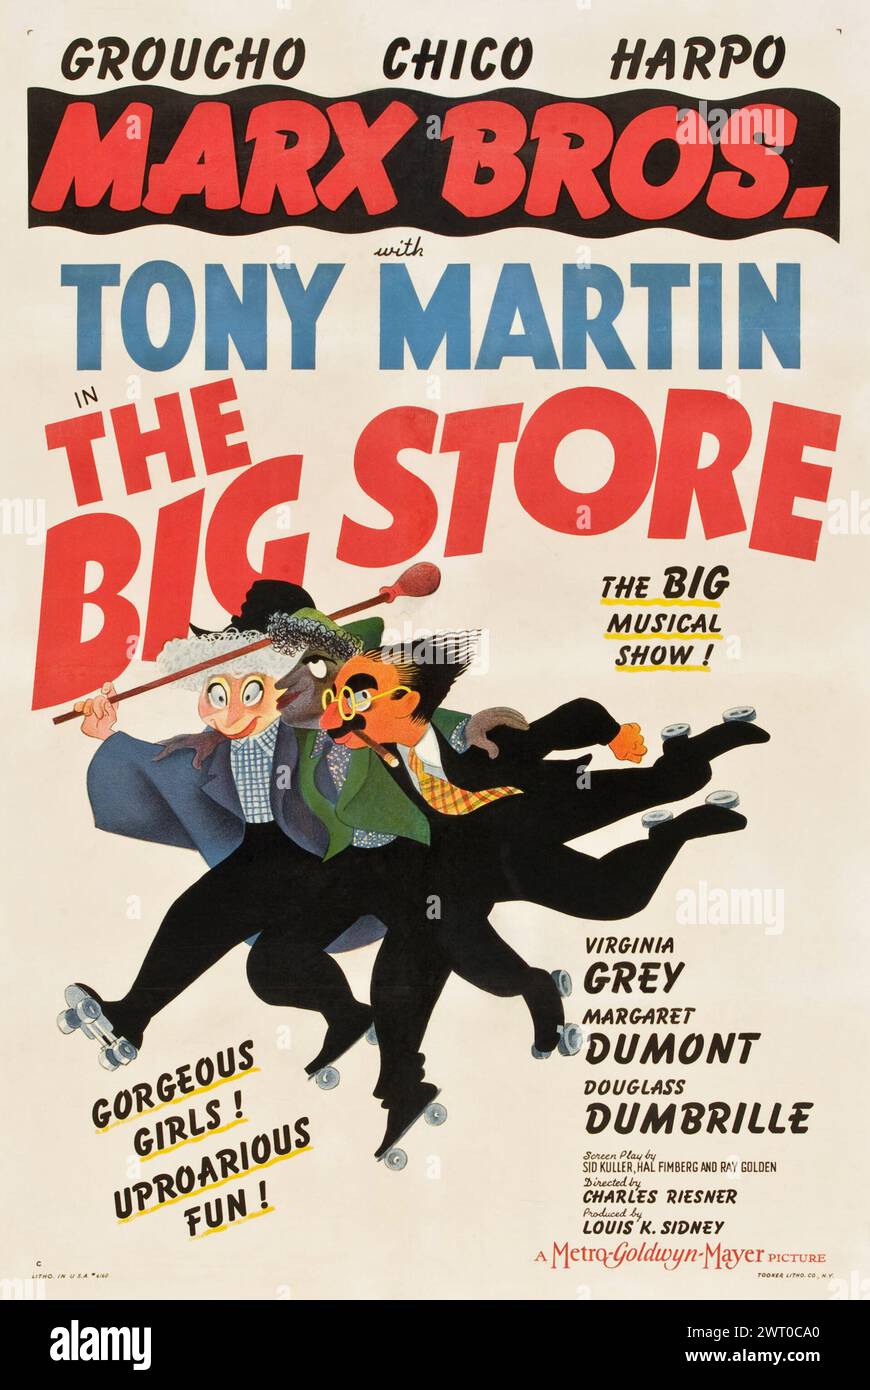 Marx Brothers - Groucho, Chico, Harpo - Vintage movie poster for the 1941 film The Big Store Stock Photo